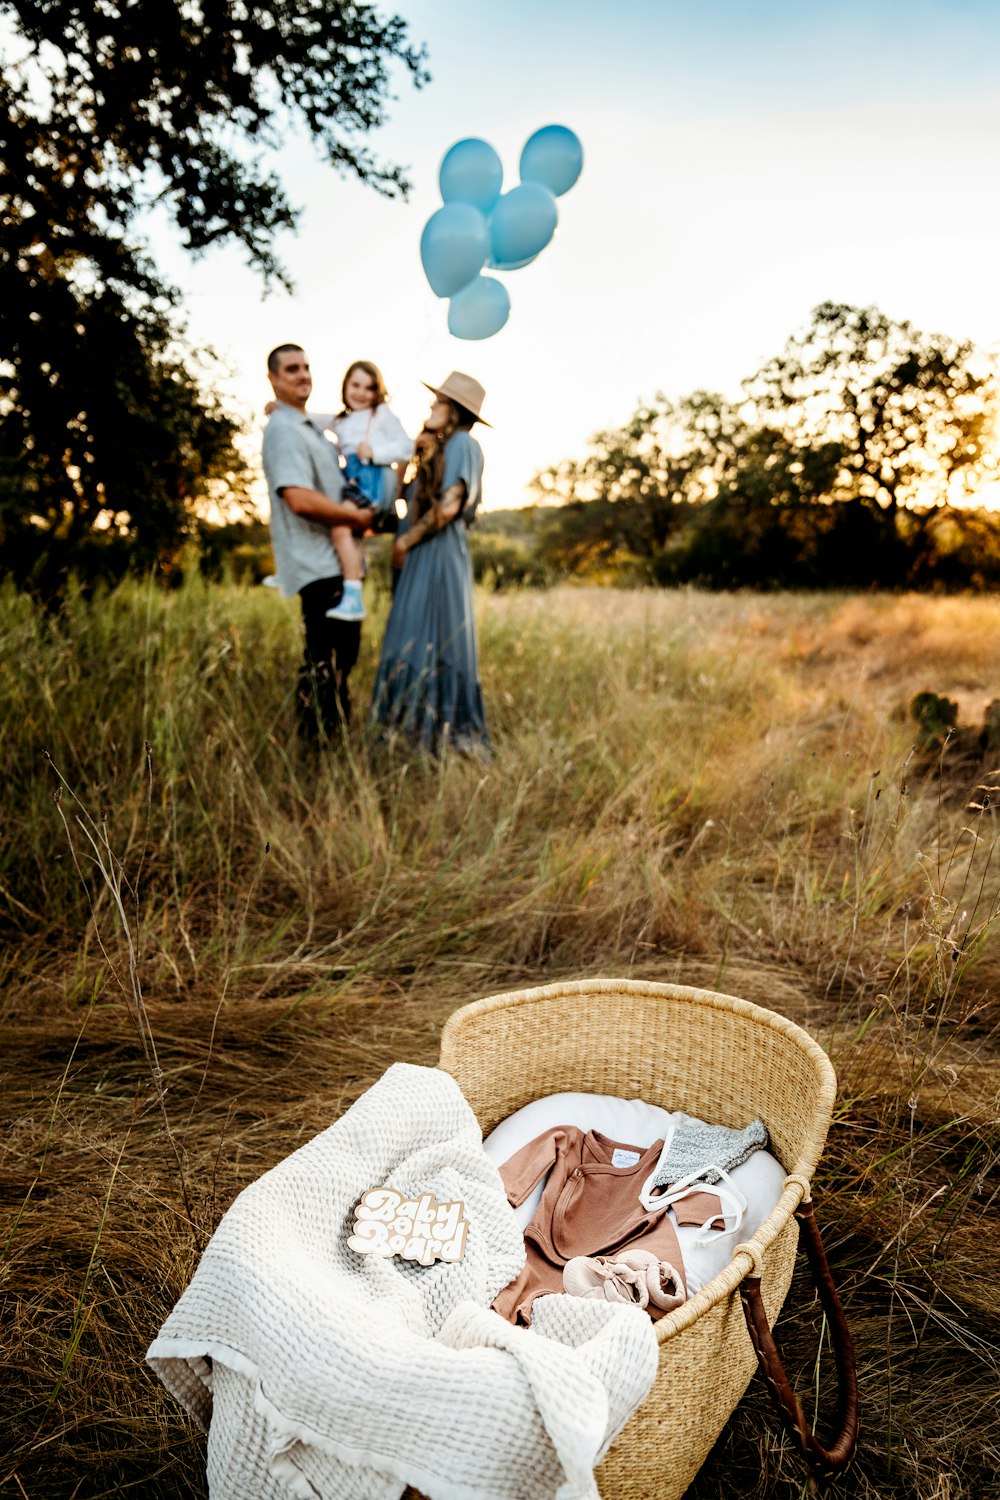 a baby in a basket in a field with balloons